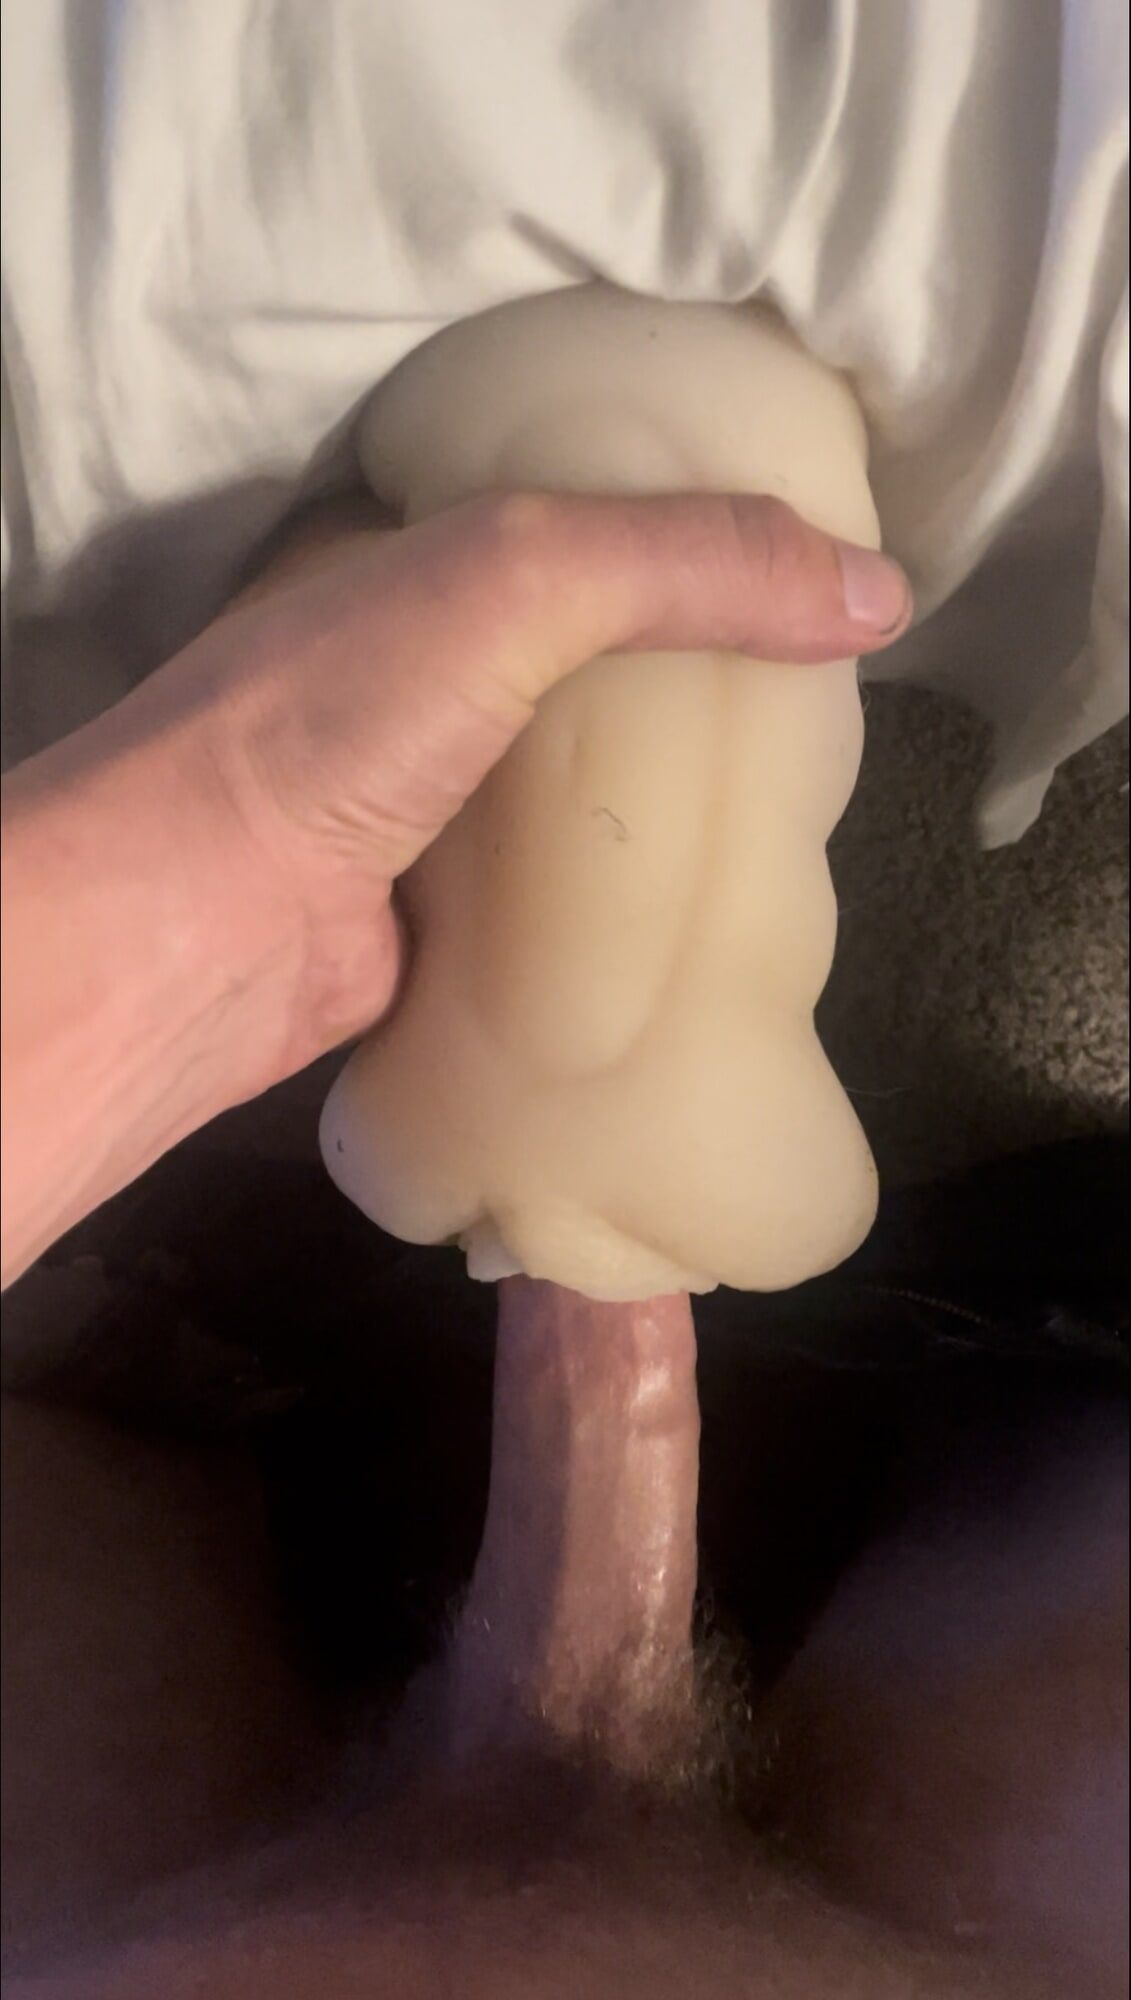 More pictures of my cock #27